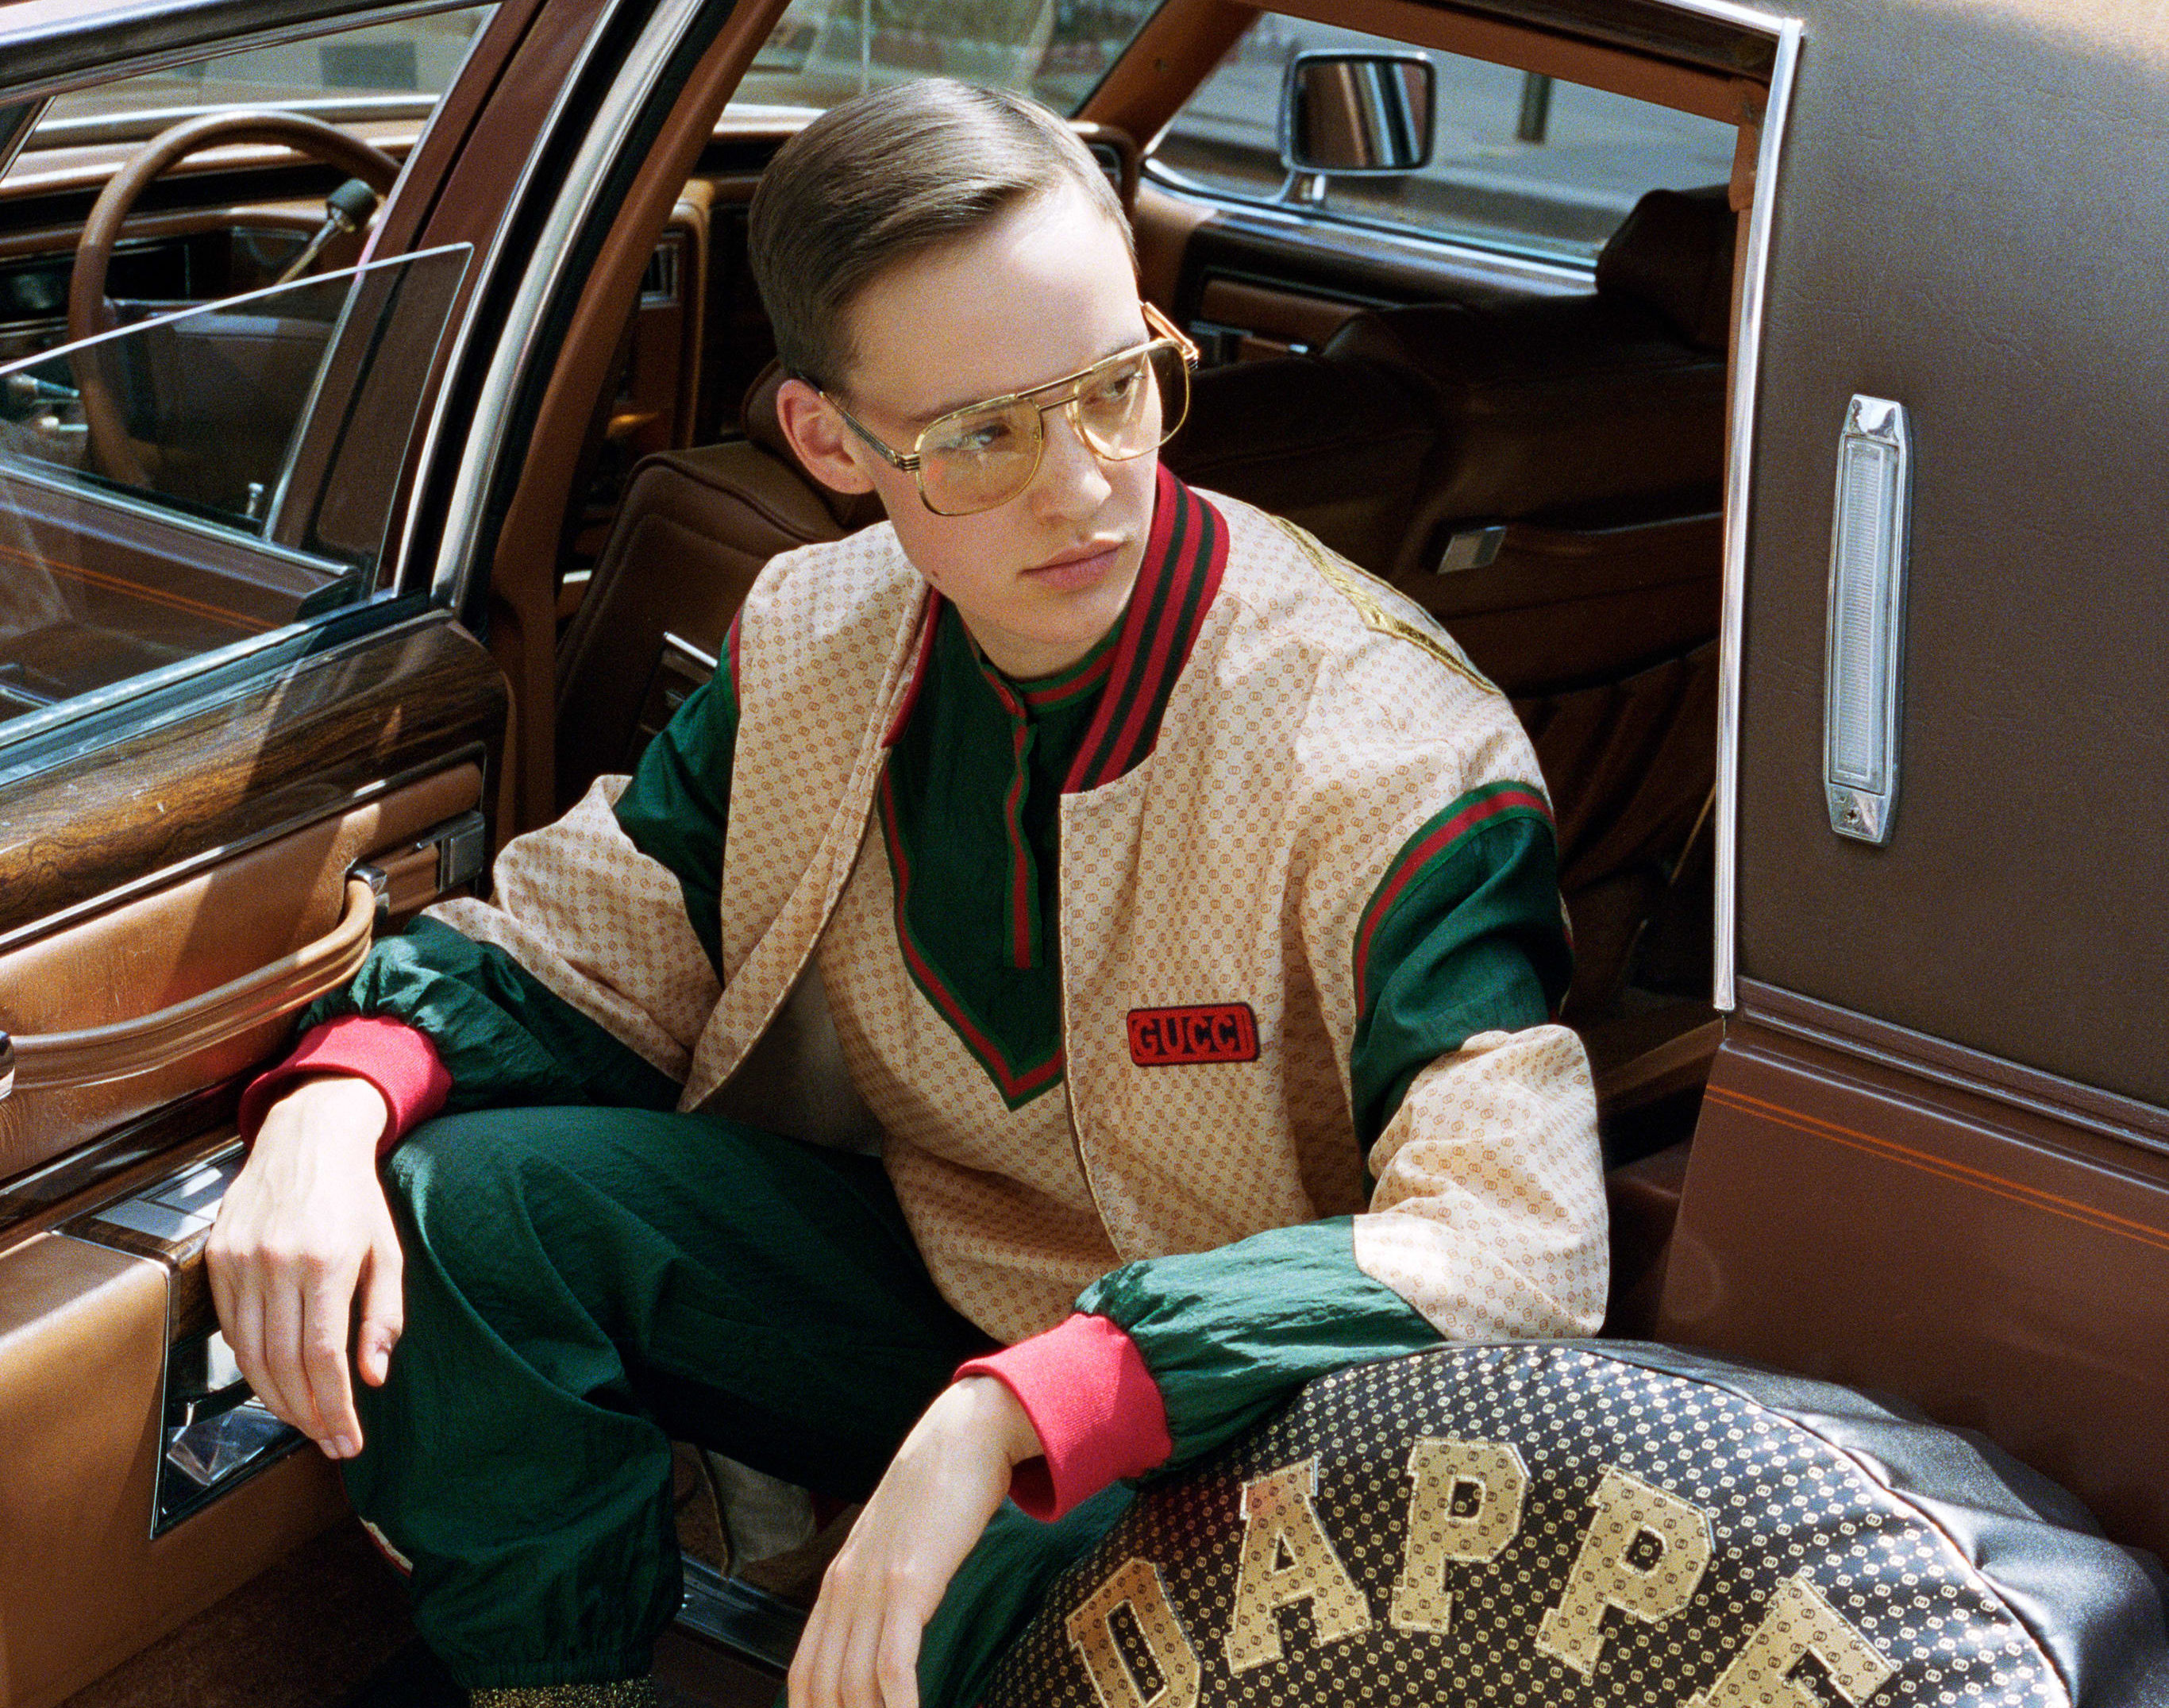 What's in a name? From Gucci to Dapper Dan and the business of knockoffs -  Bubblegum Club